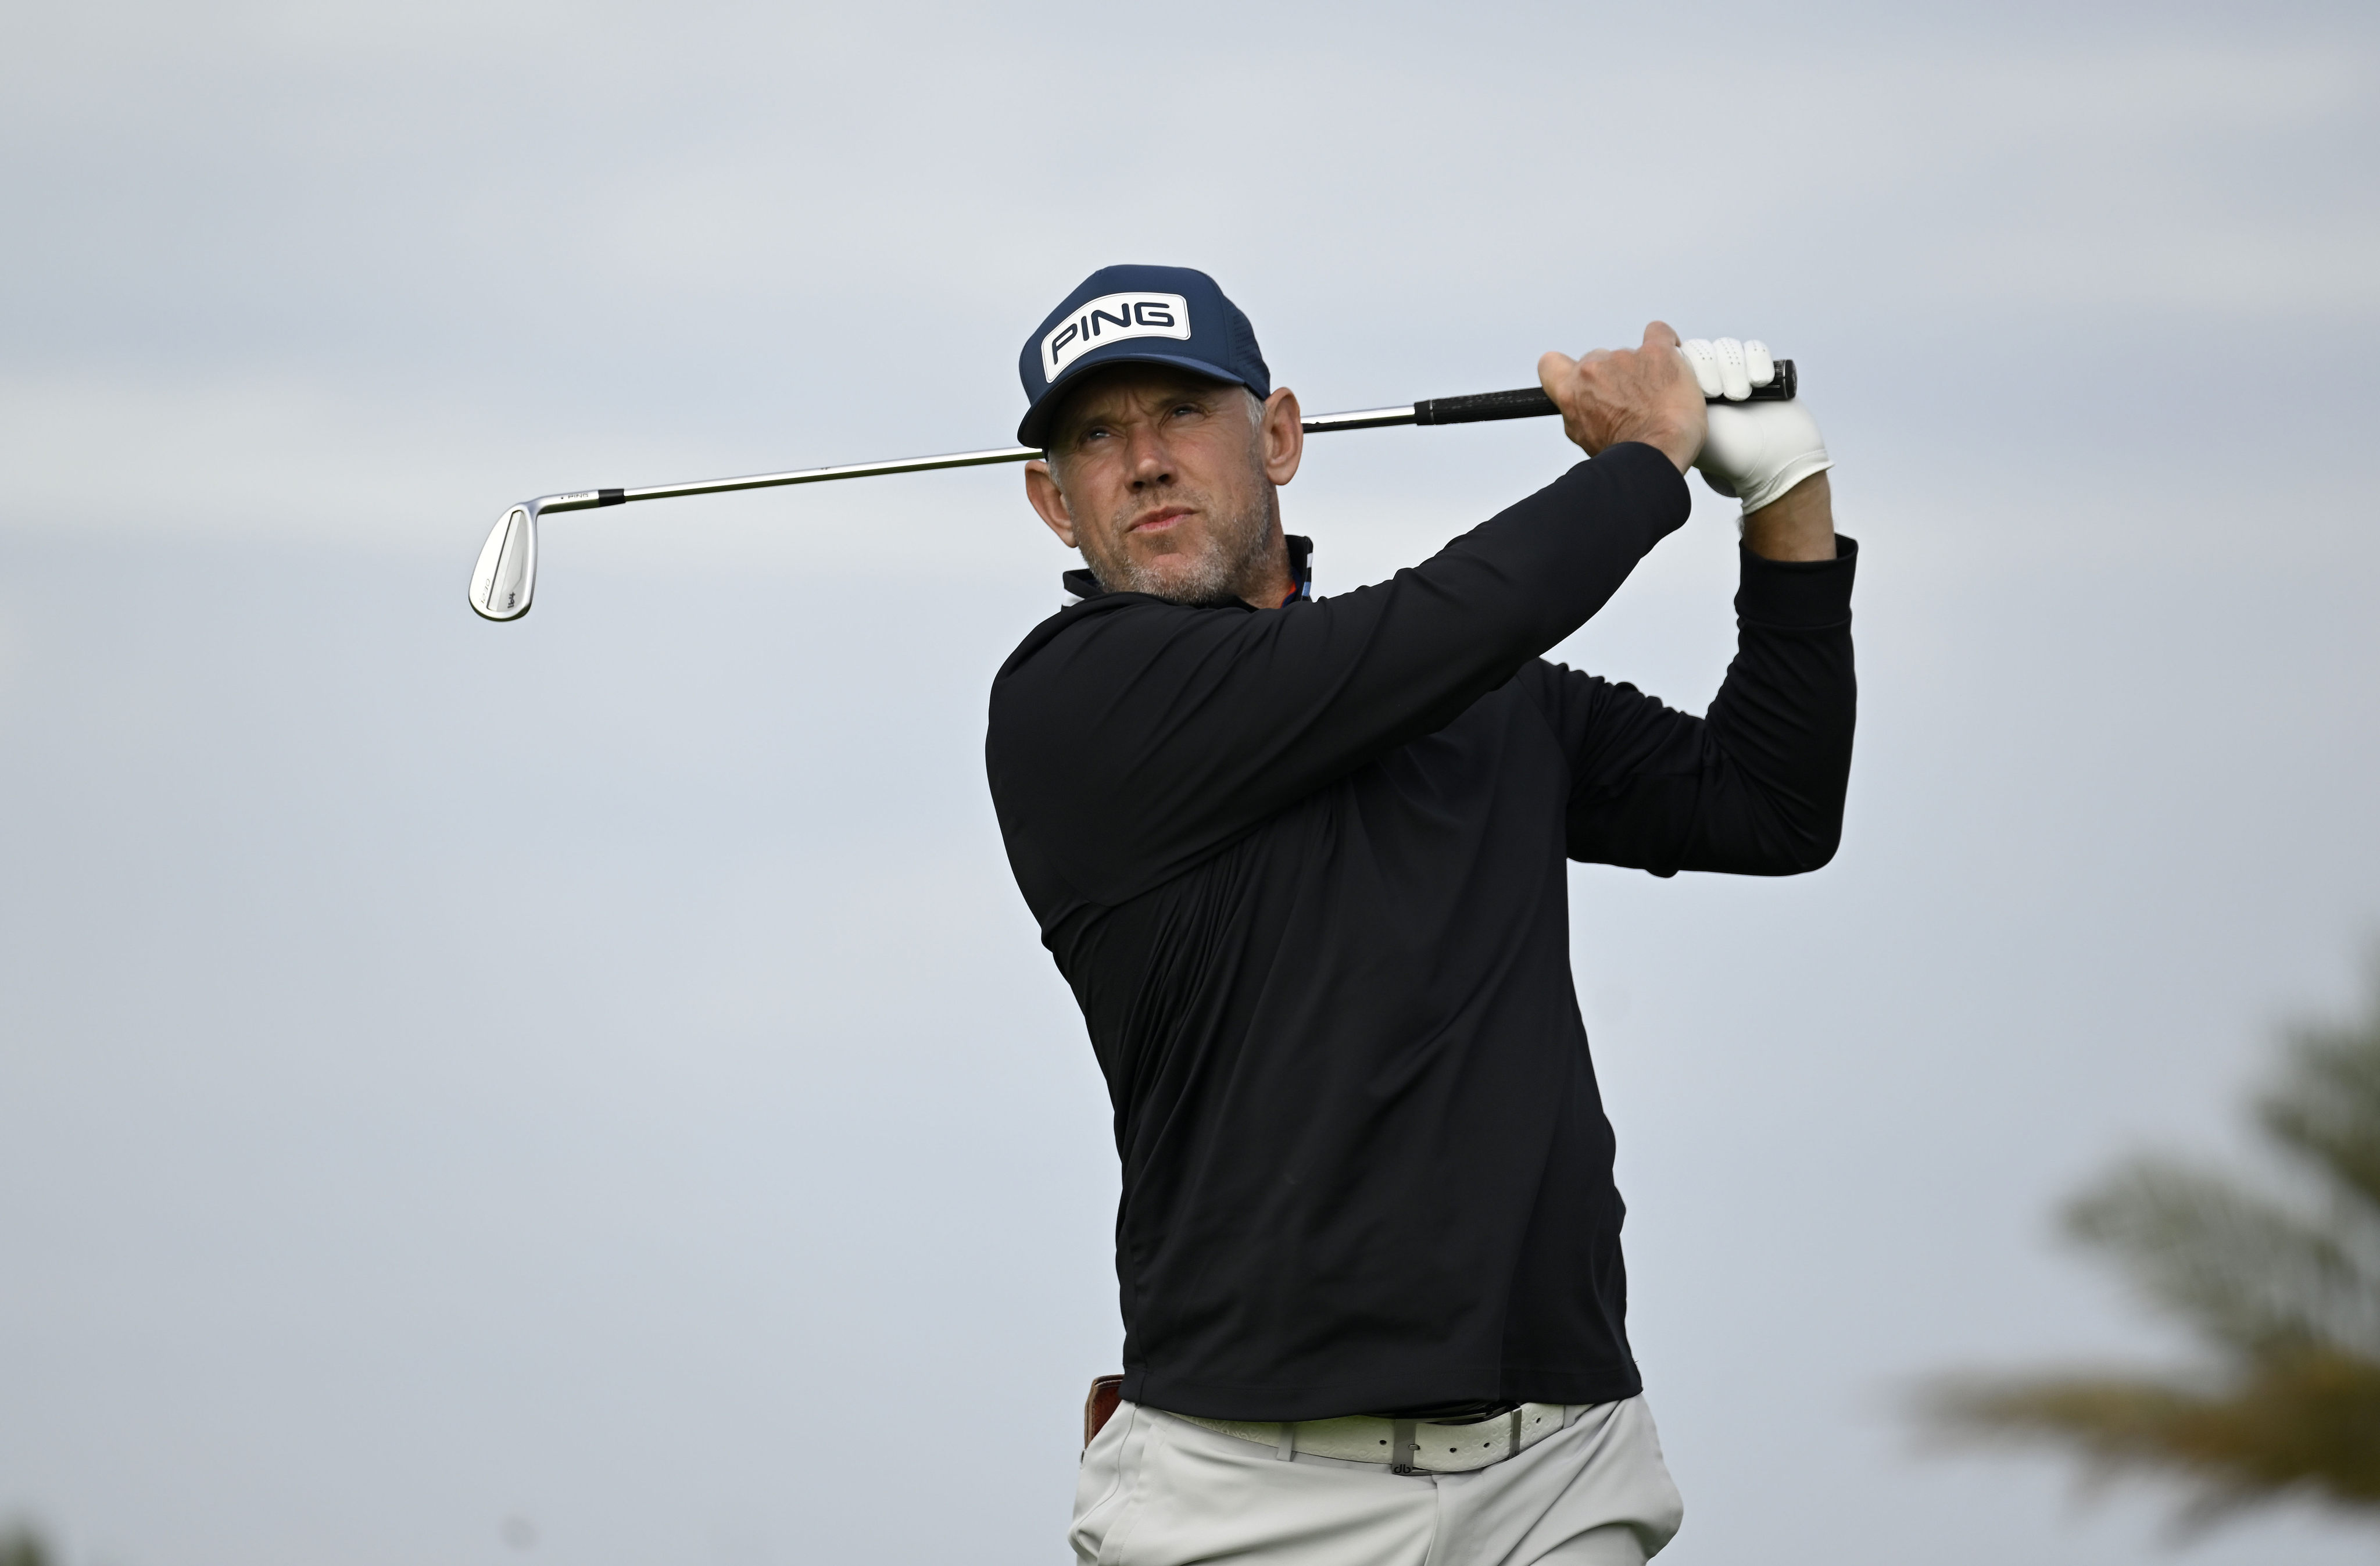 Lee Westwood will host the International Series England event at his home course at Close House Golf Club. Photo: Asian Tour